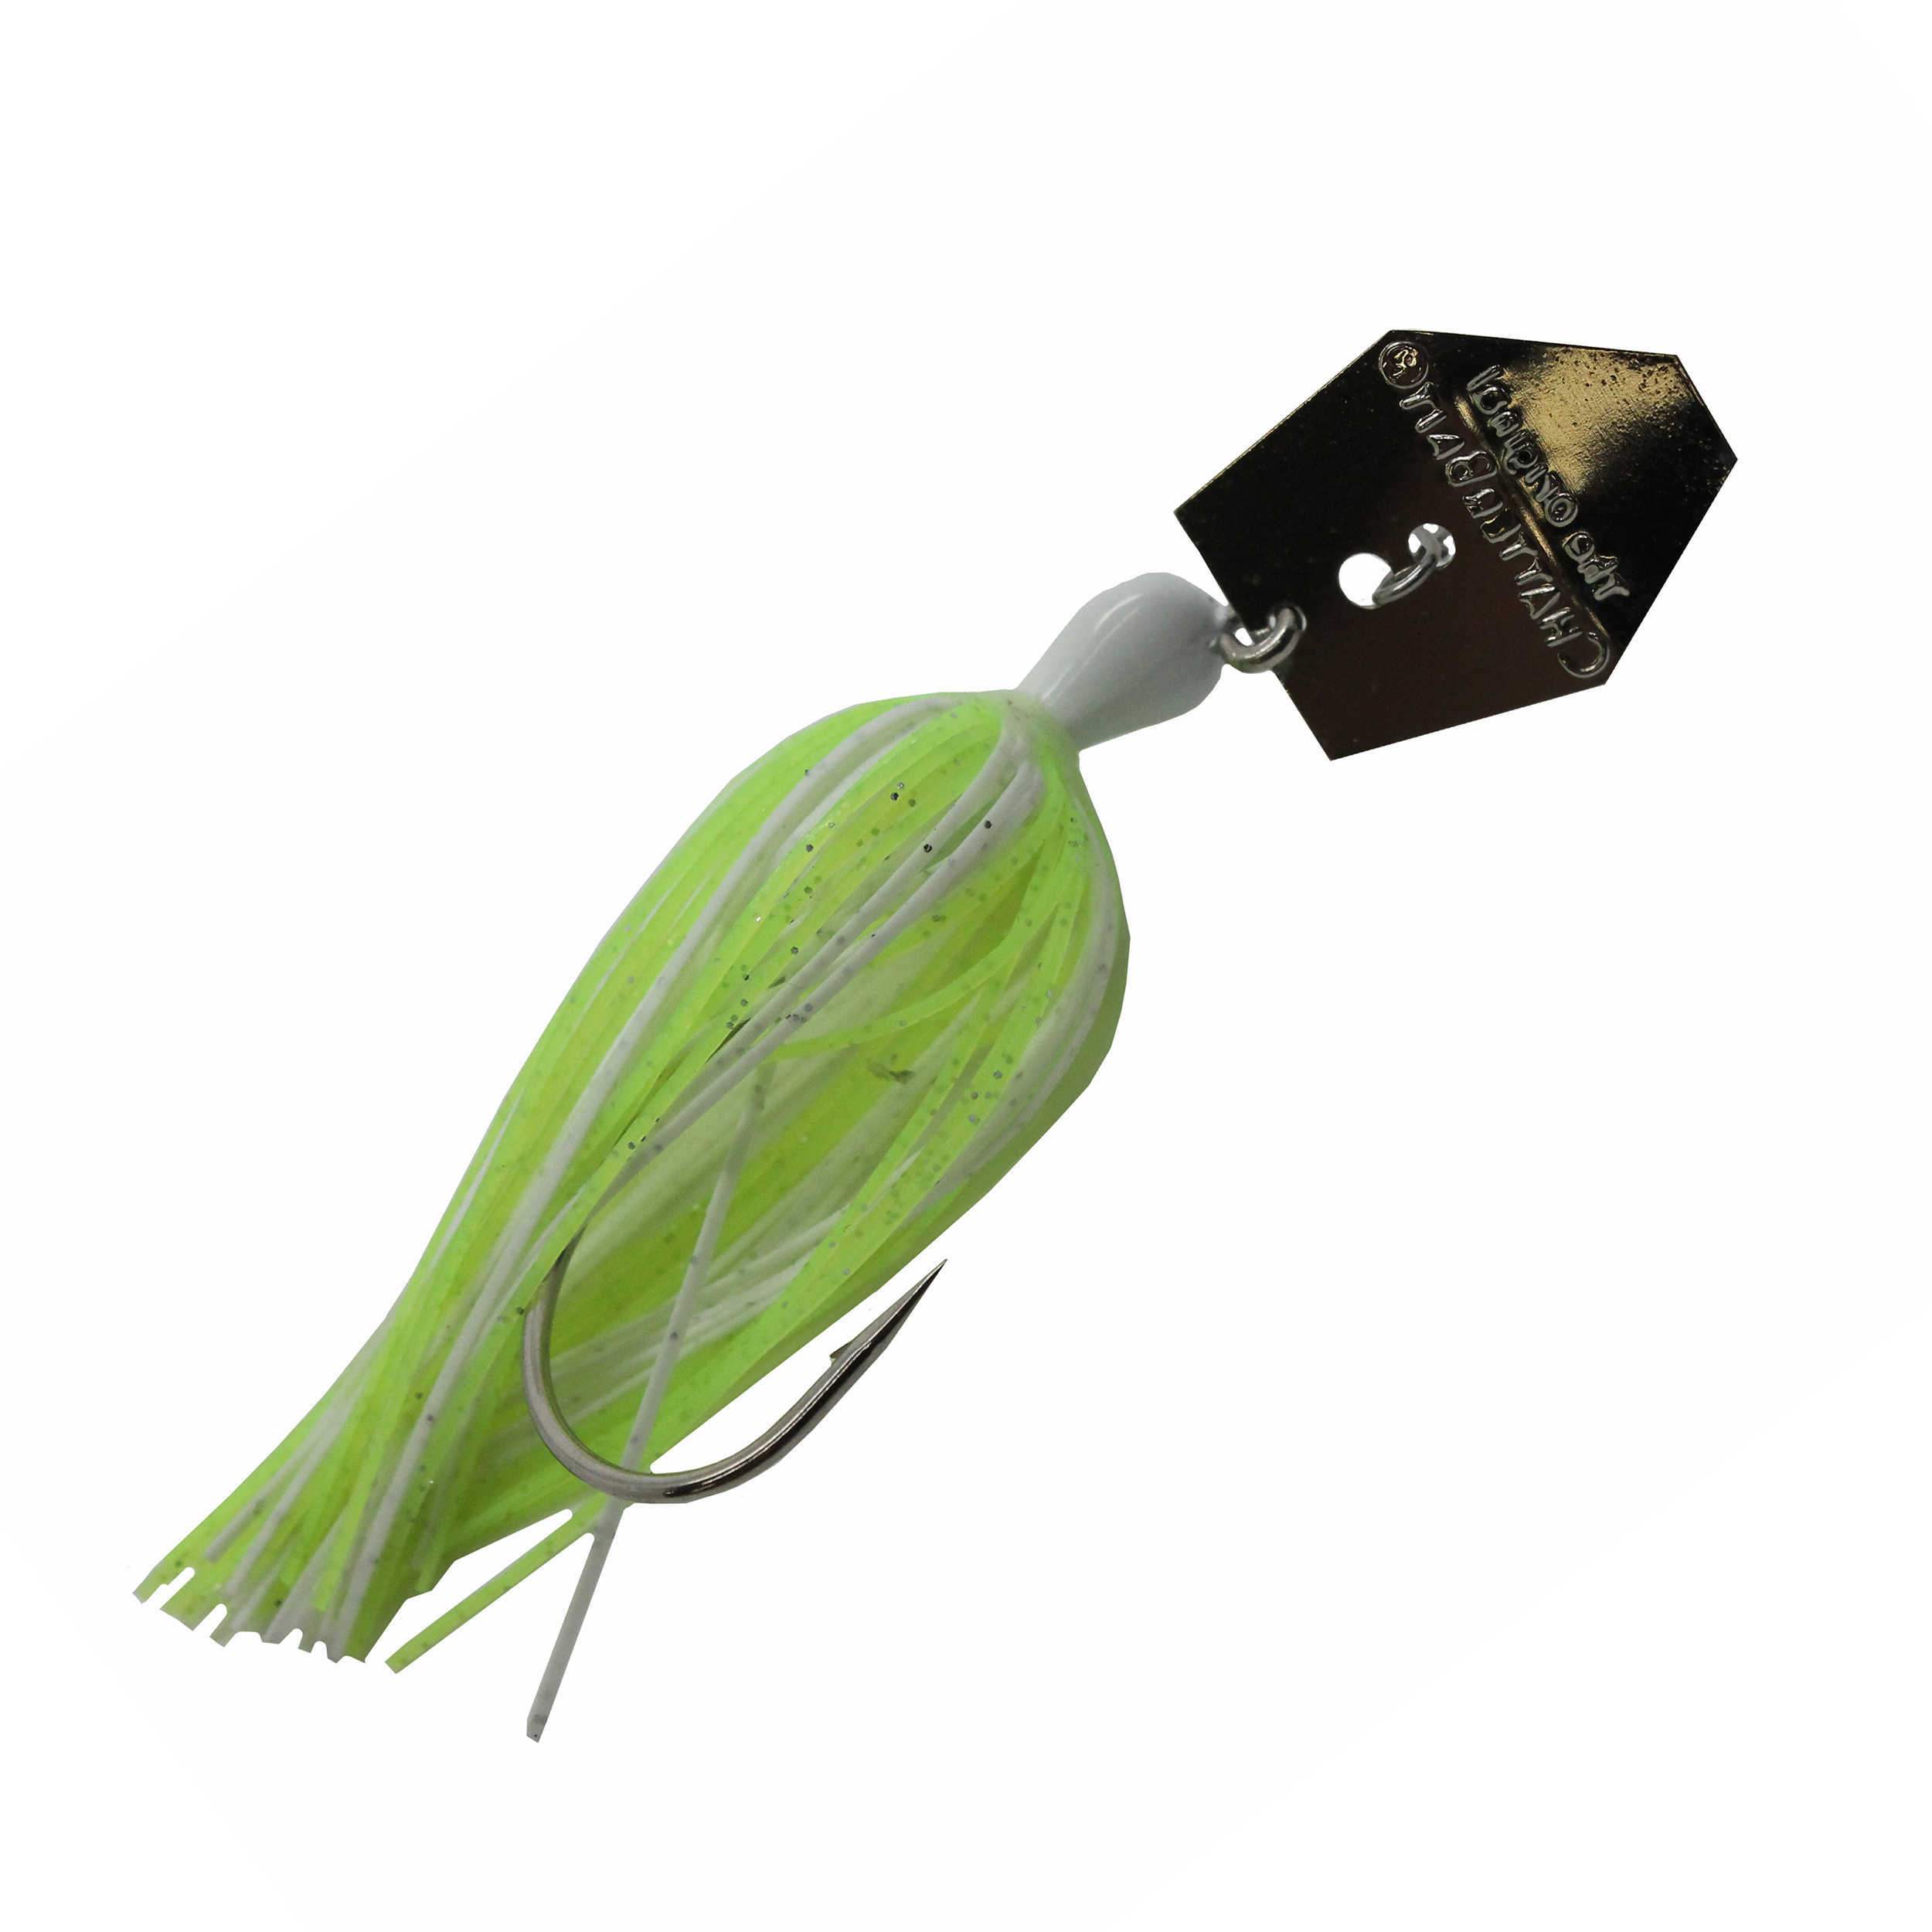 Z-Man Fishing Products Chatter Bait 1/2 Ounce Chartreuse/White Lure, Md: CB12-16